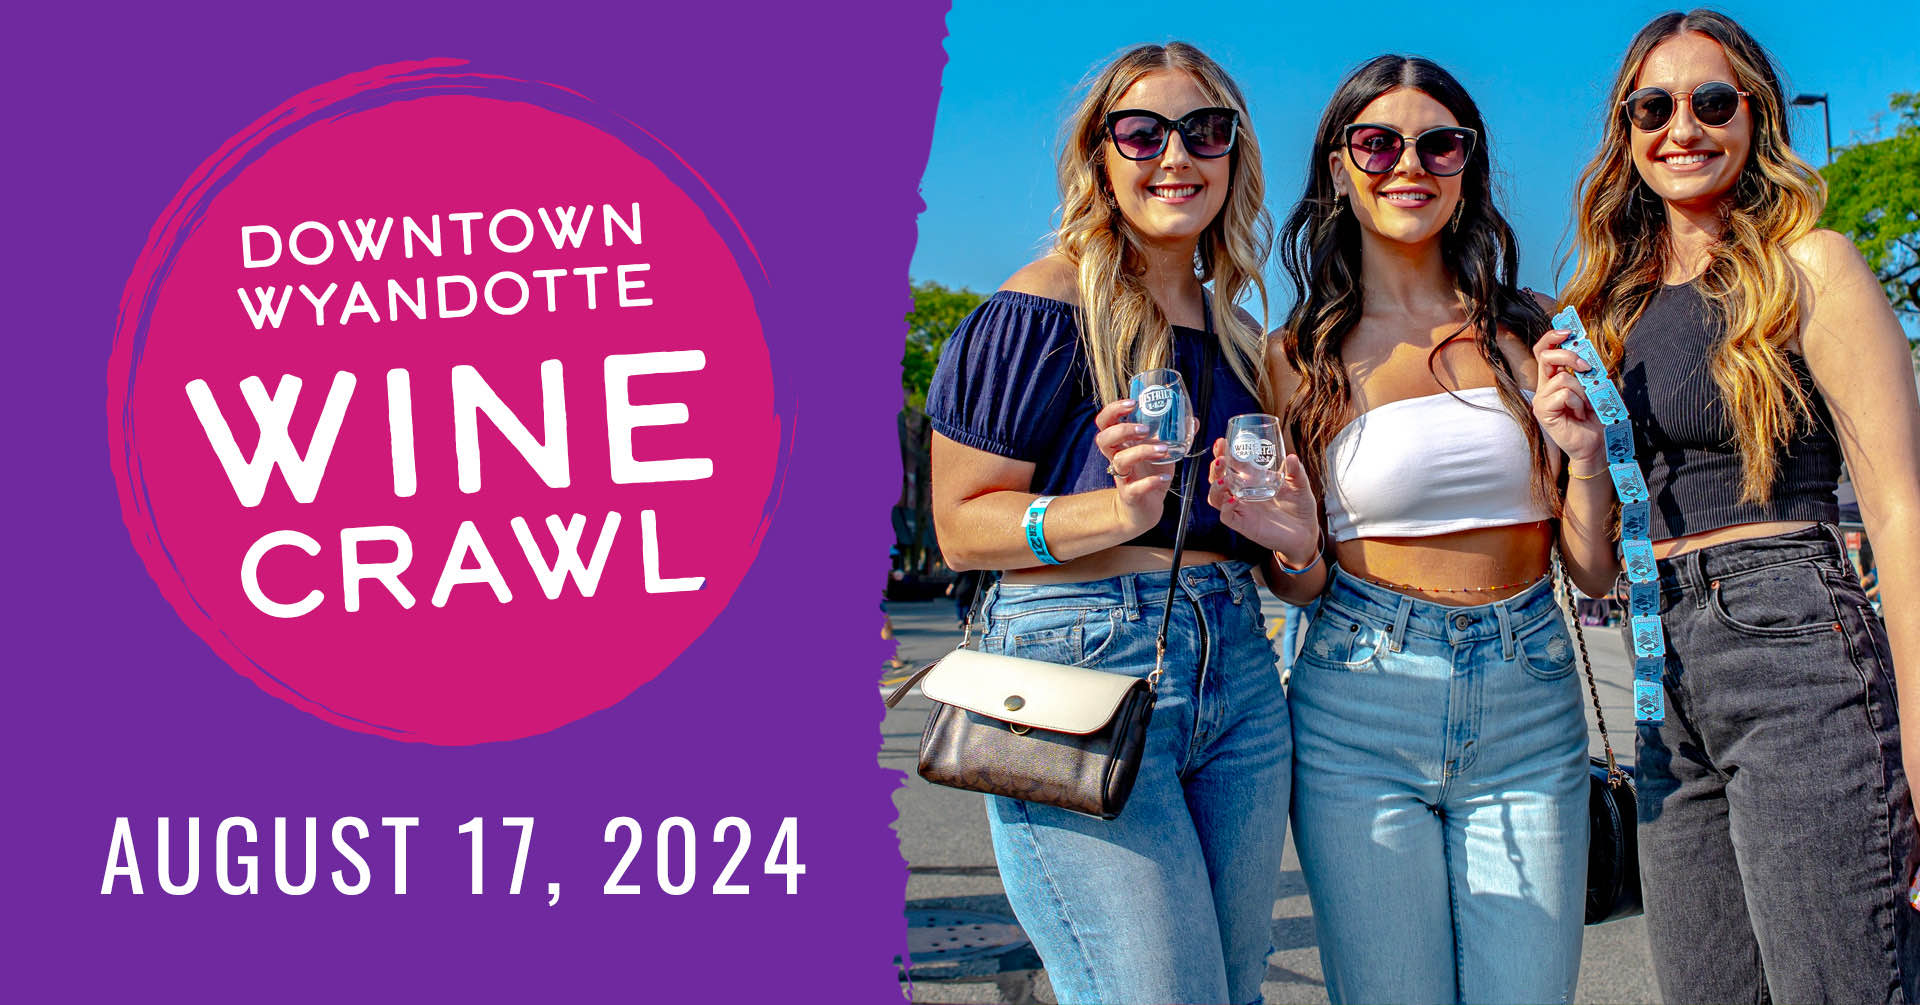 Downtown Wyandotte Wine Crawl; August 17, 2024; three young woman wearing sunglasses and holding wine glasses